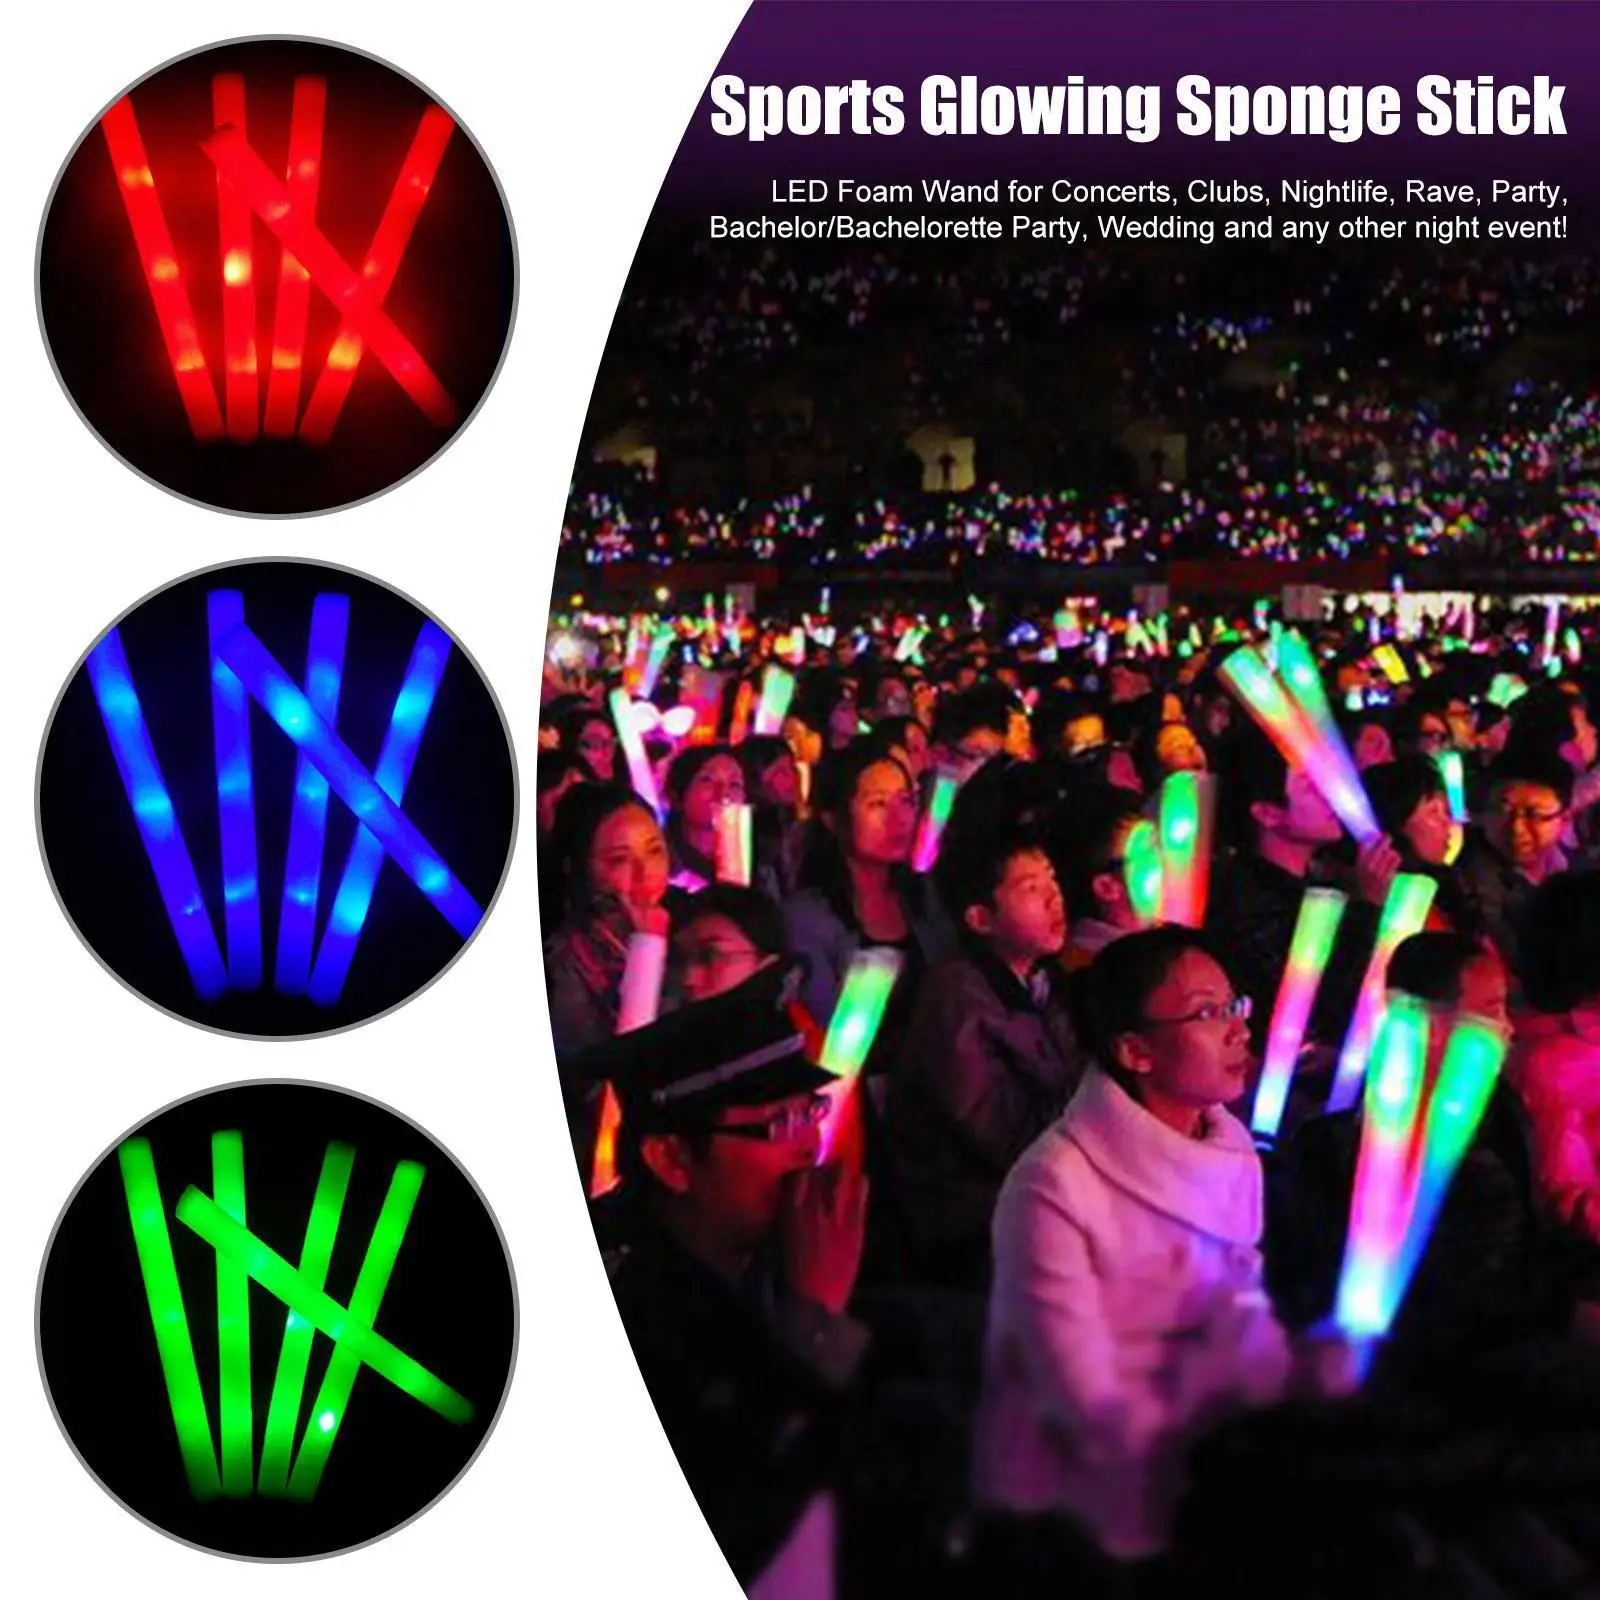 

Glow Sticks Colorful LED Foam Stick Glow Sticks Cheer Tube DIY LED Glow In The Dark Light For Concert Party Carnival Rave S3K5